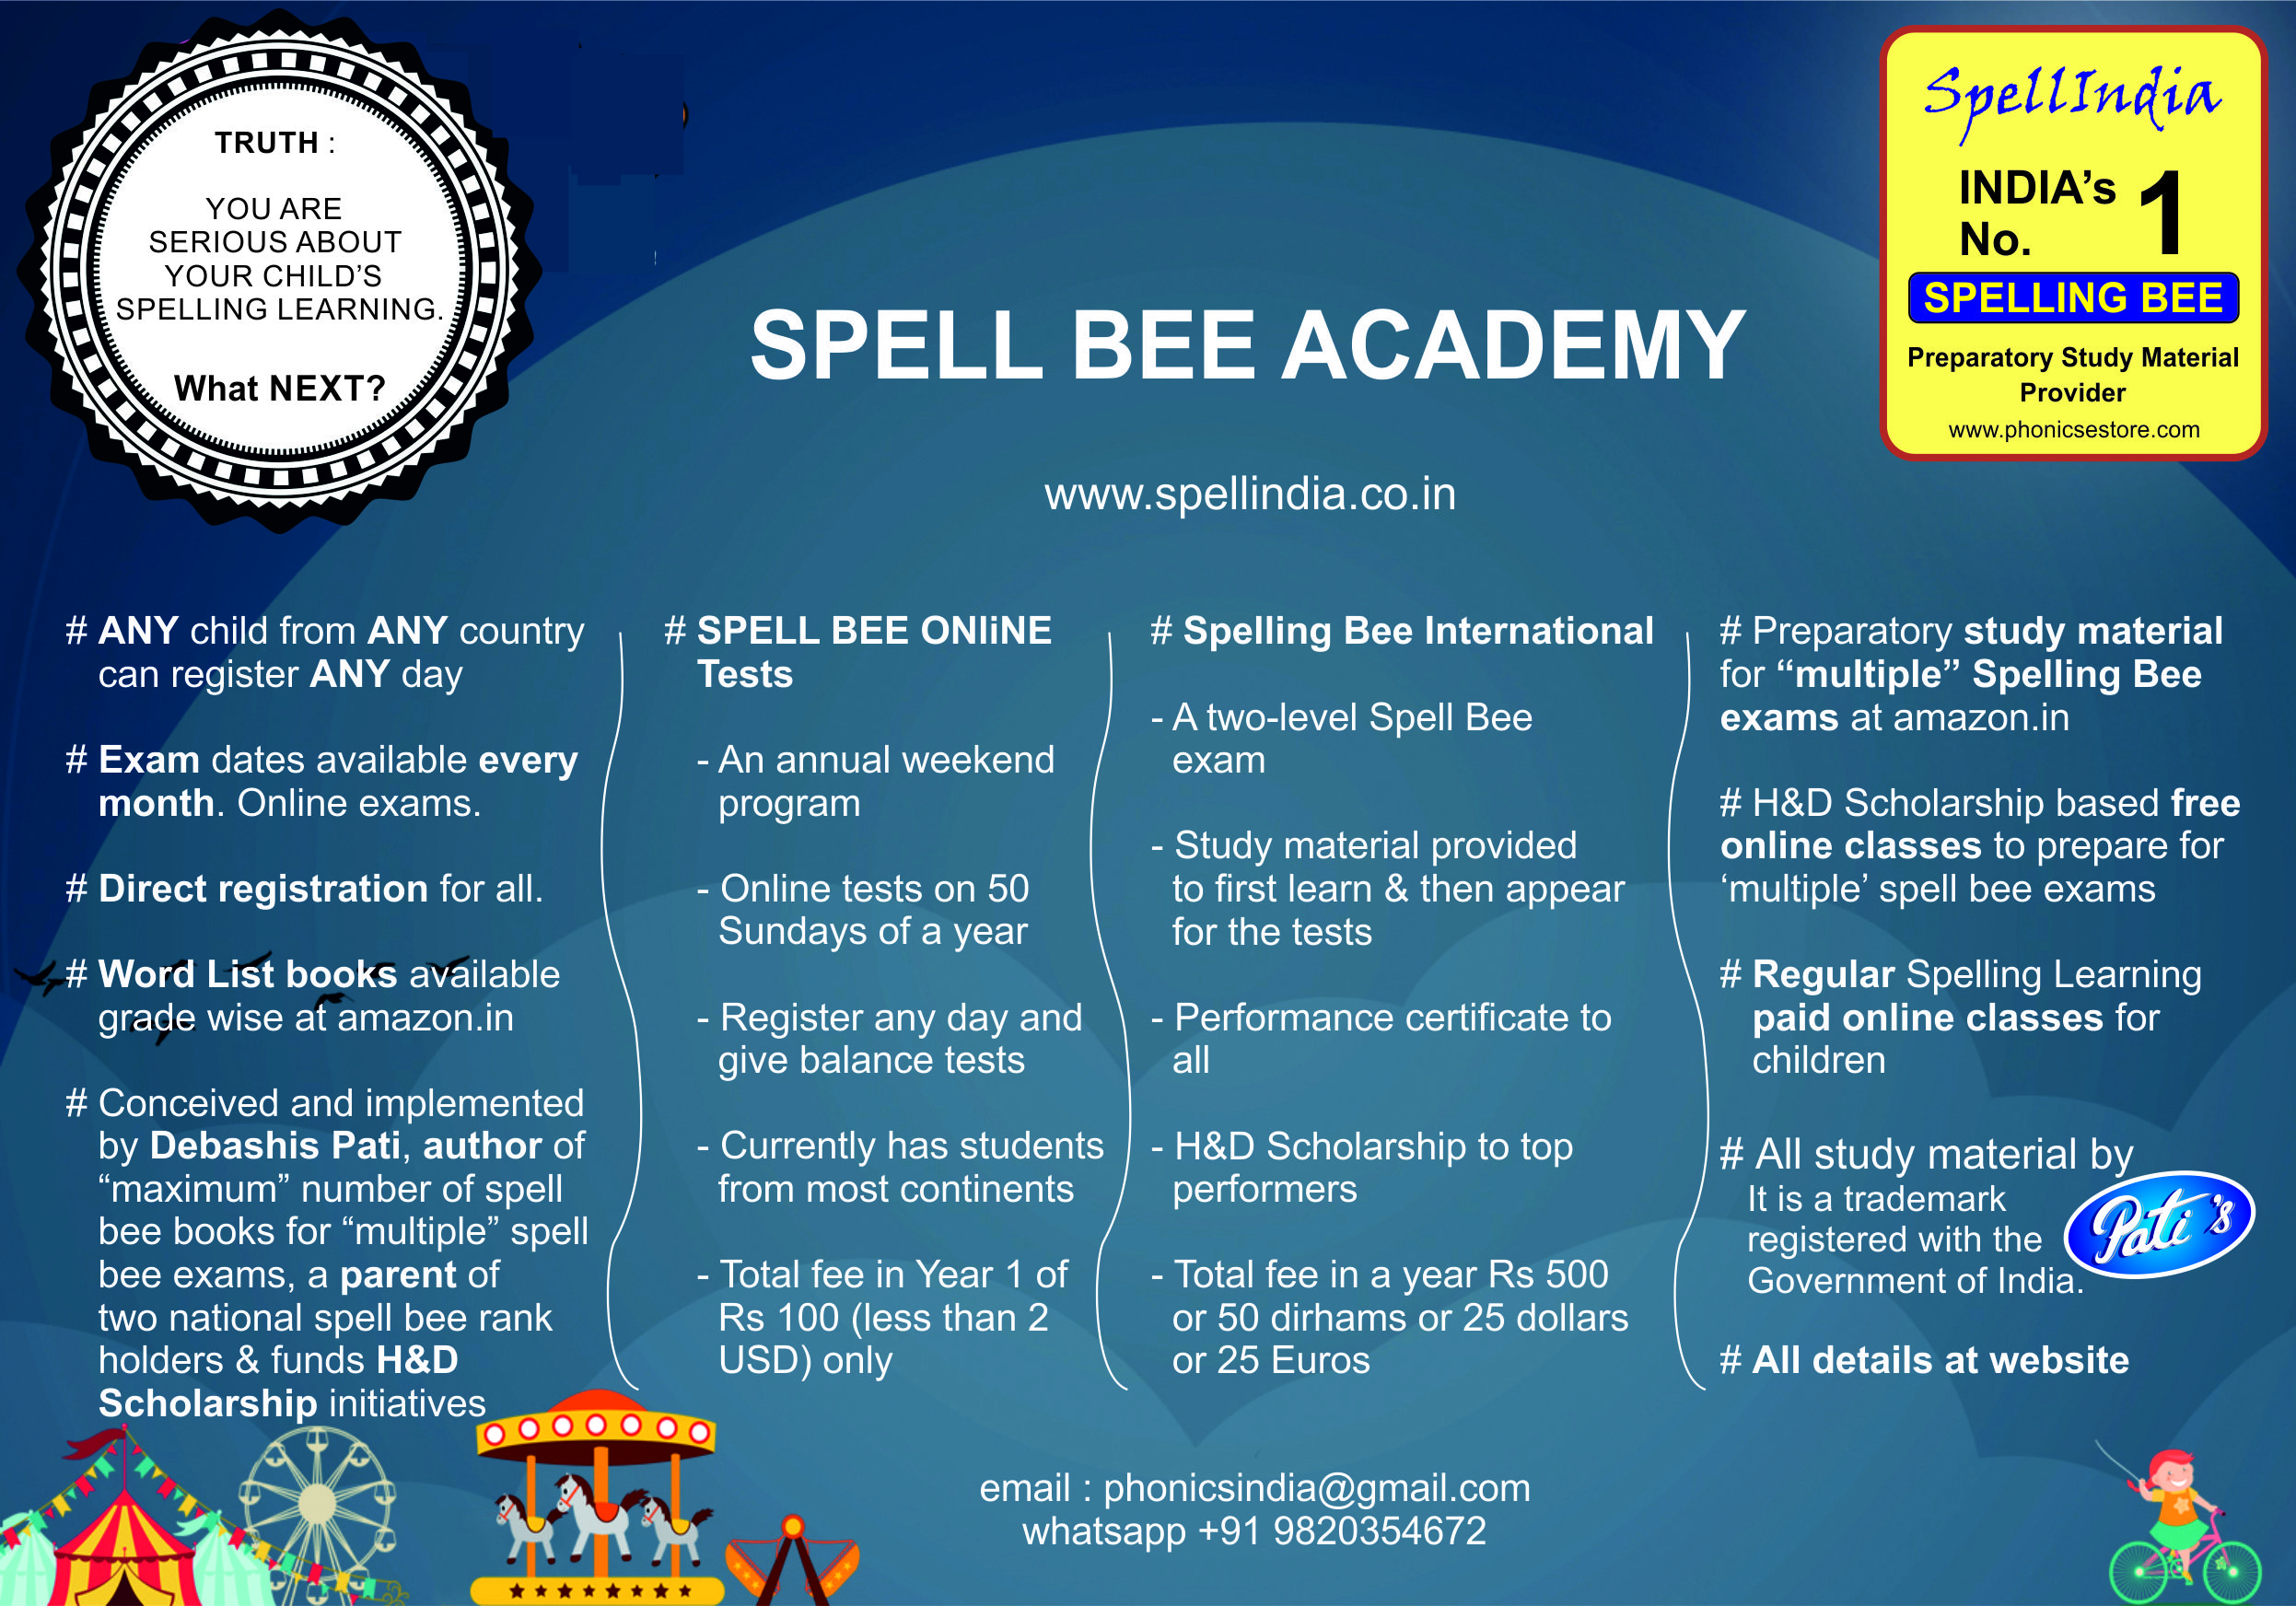 Competition ... Spelling exams ... Spell Bee exam